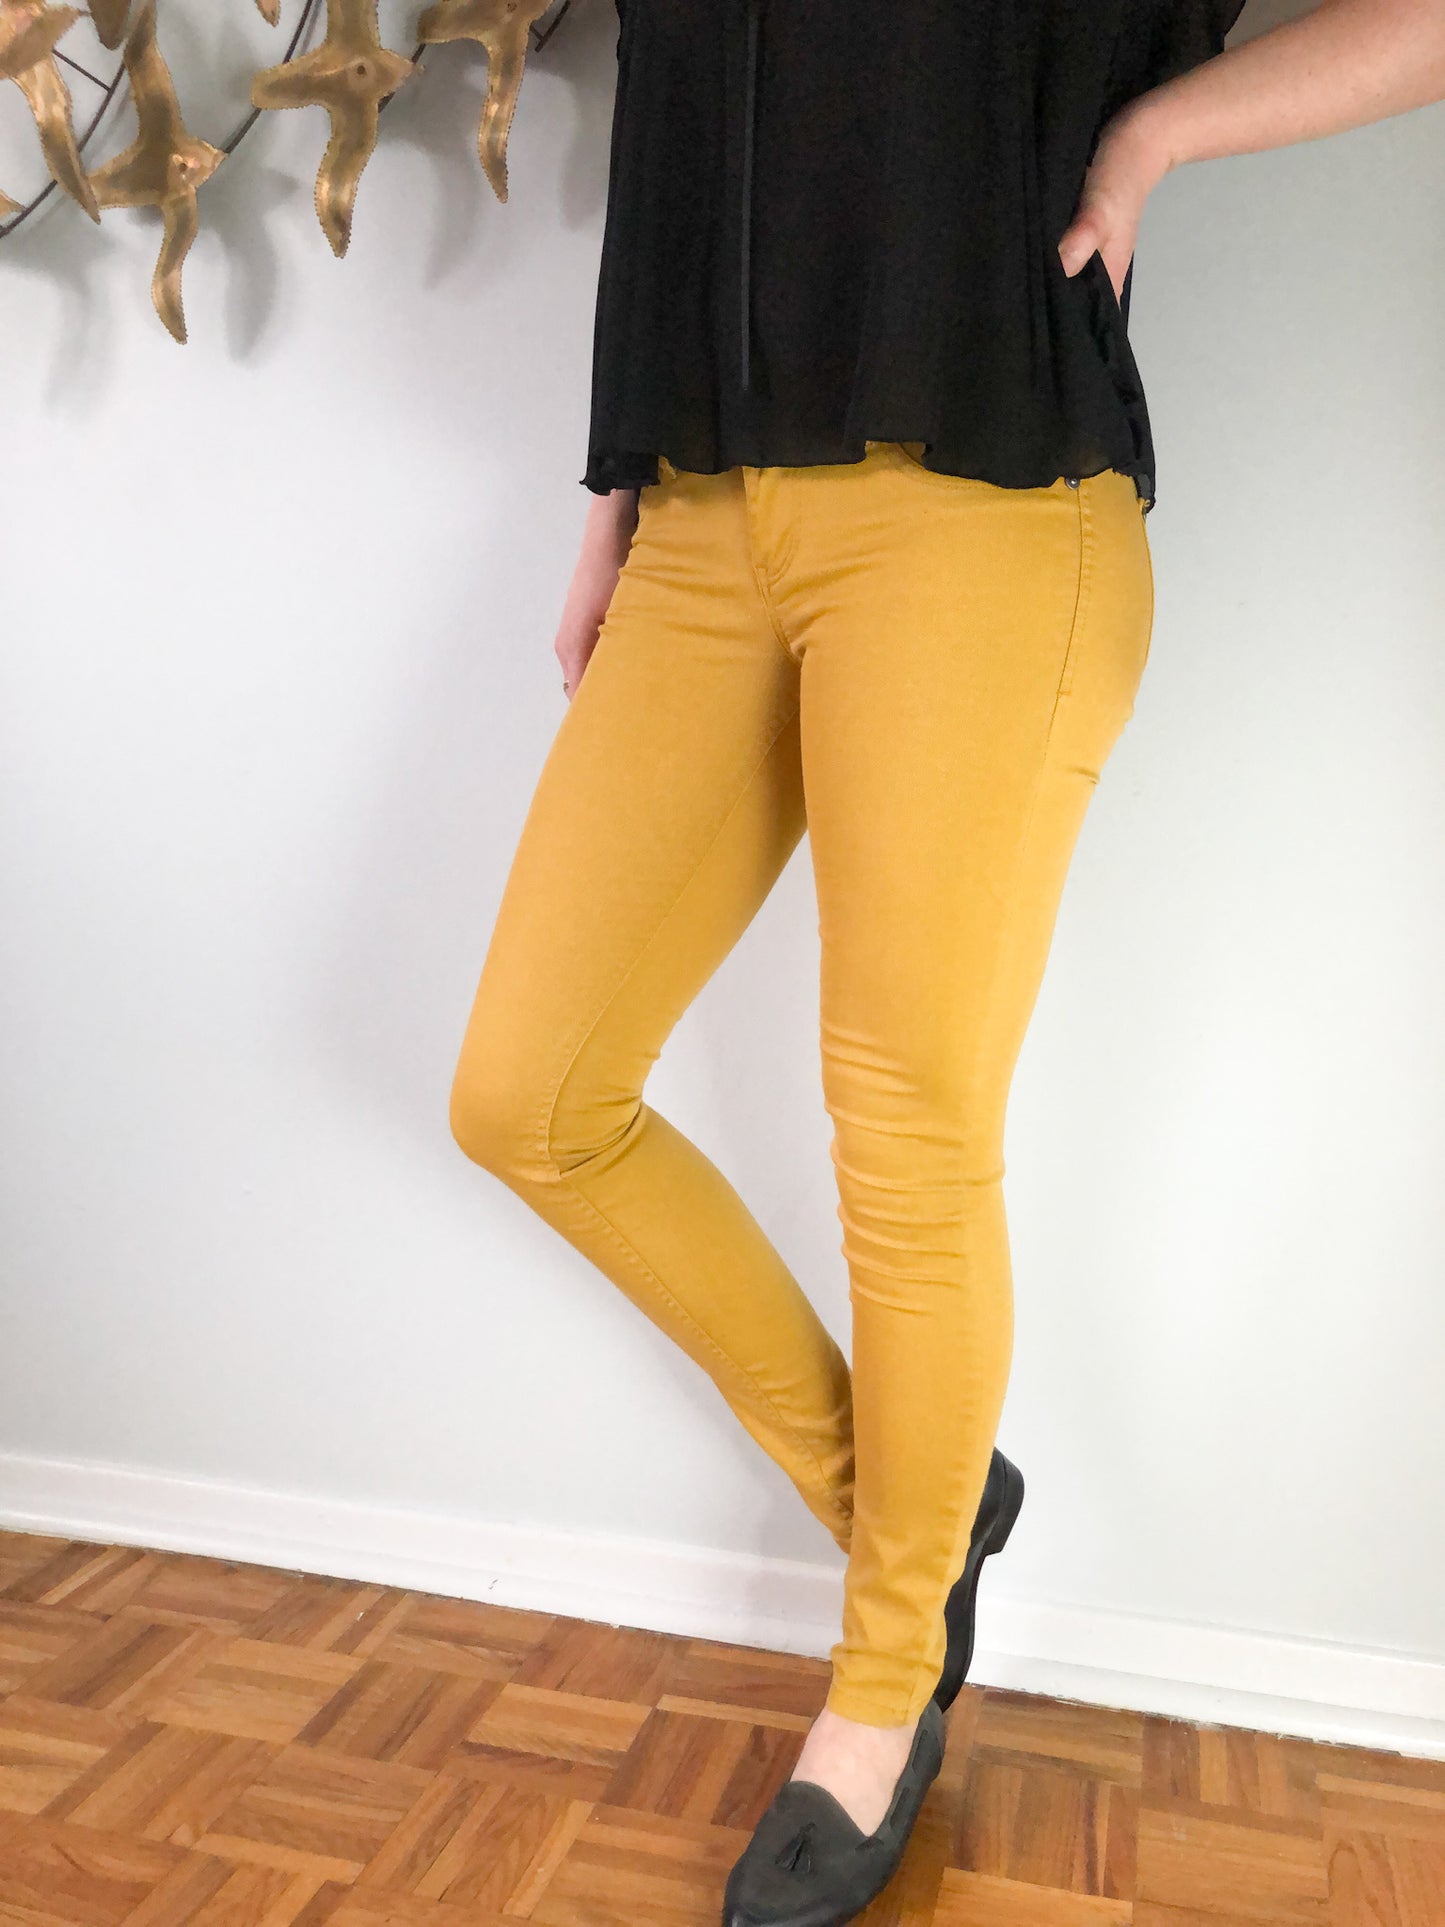 Material Girl Mustard Yellow Skinny Jeggings - Size 1 (XS/S)